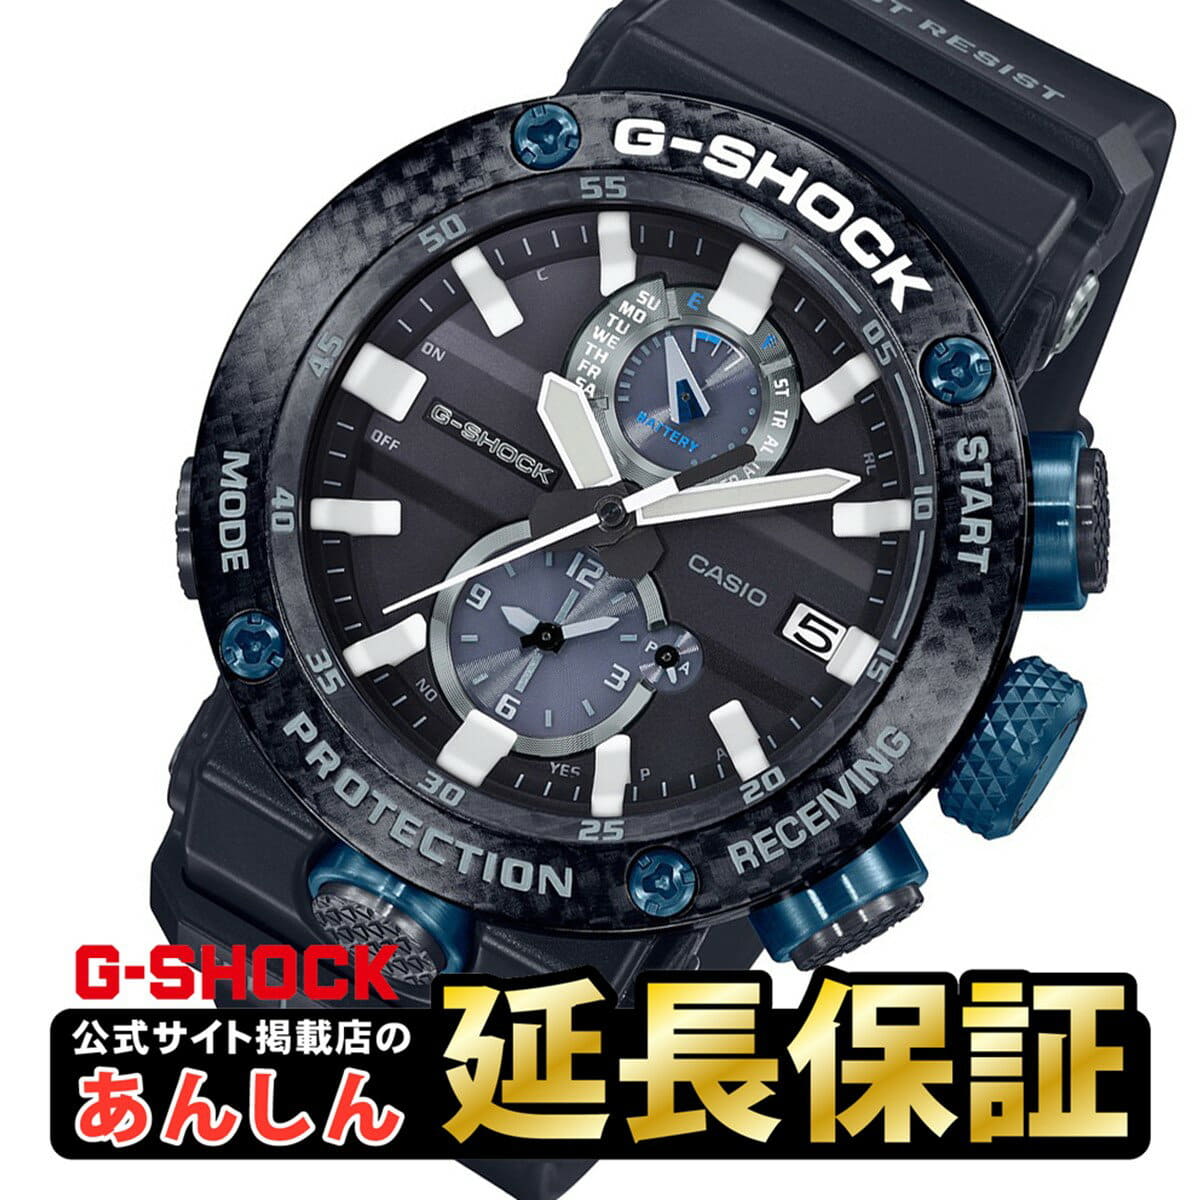 New] Casio G-Shock GWR-B1000-1A1JF Gravity Master carbon core